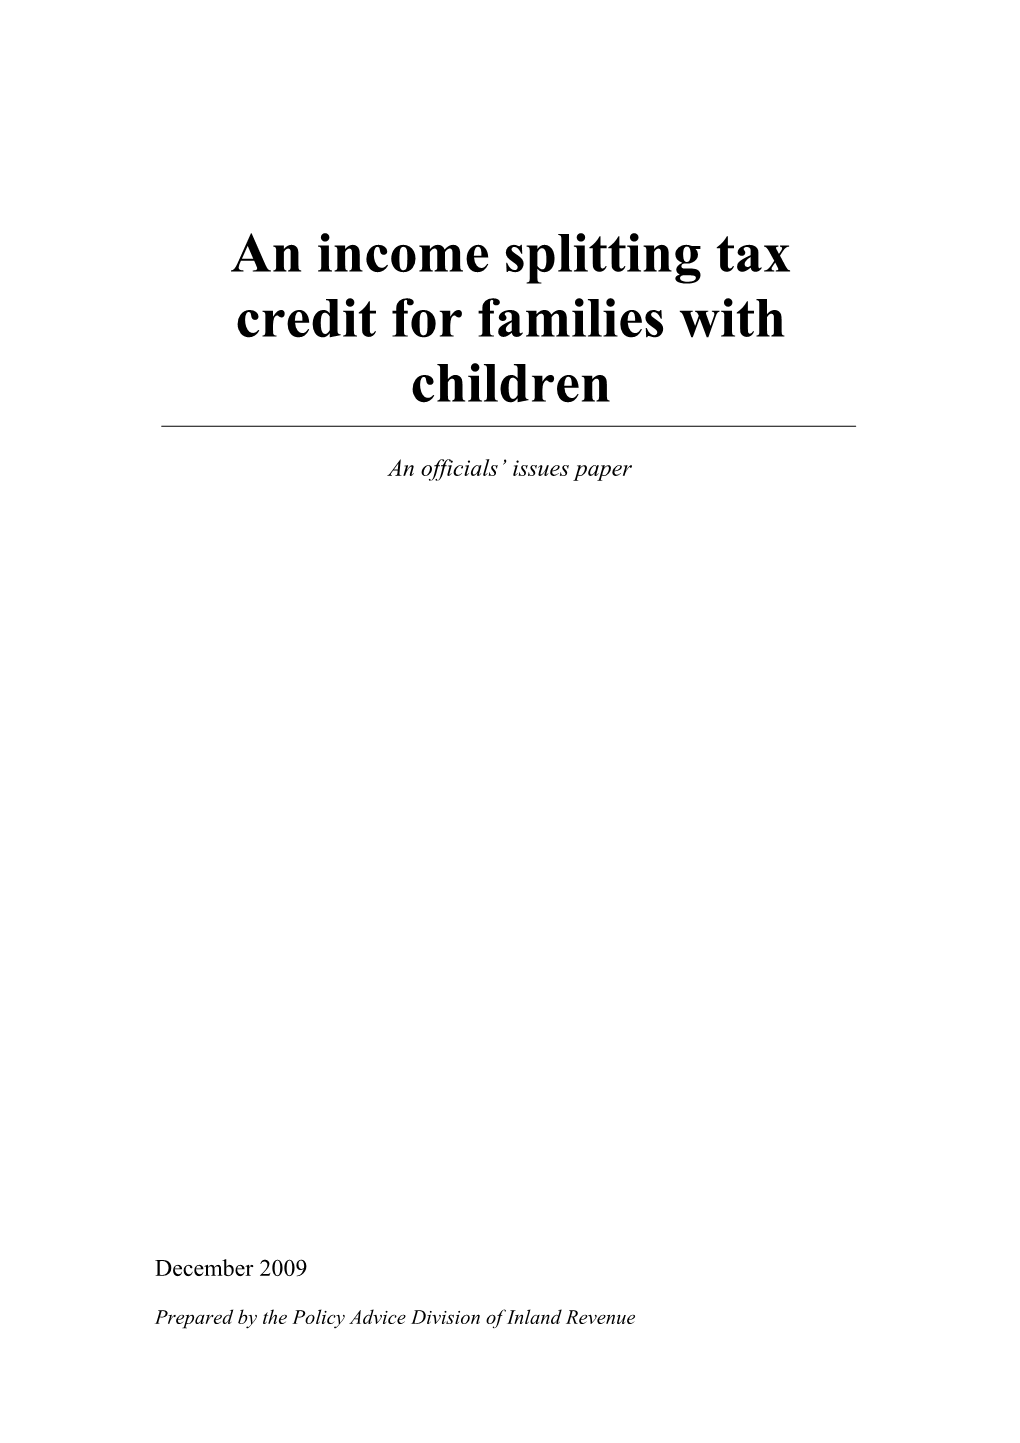 An Income Splitting Tax Credit for Families with Children: an Officials' Issues Paper